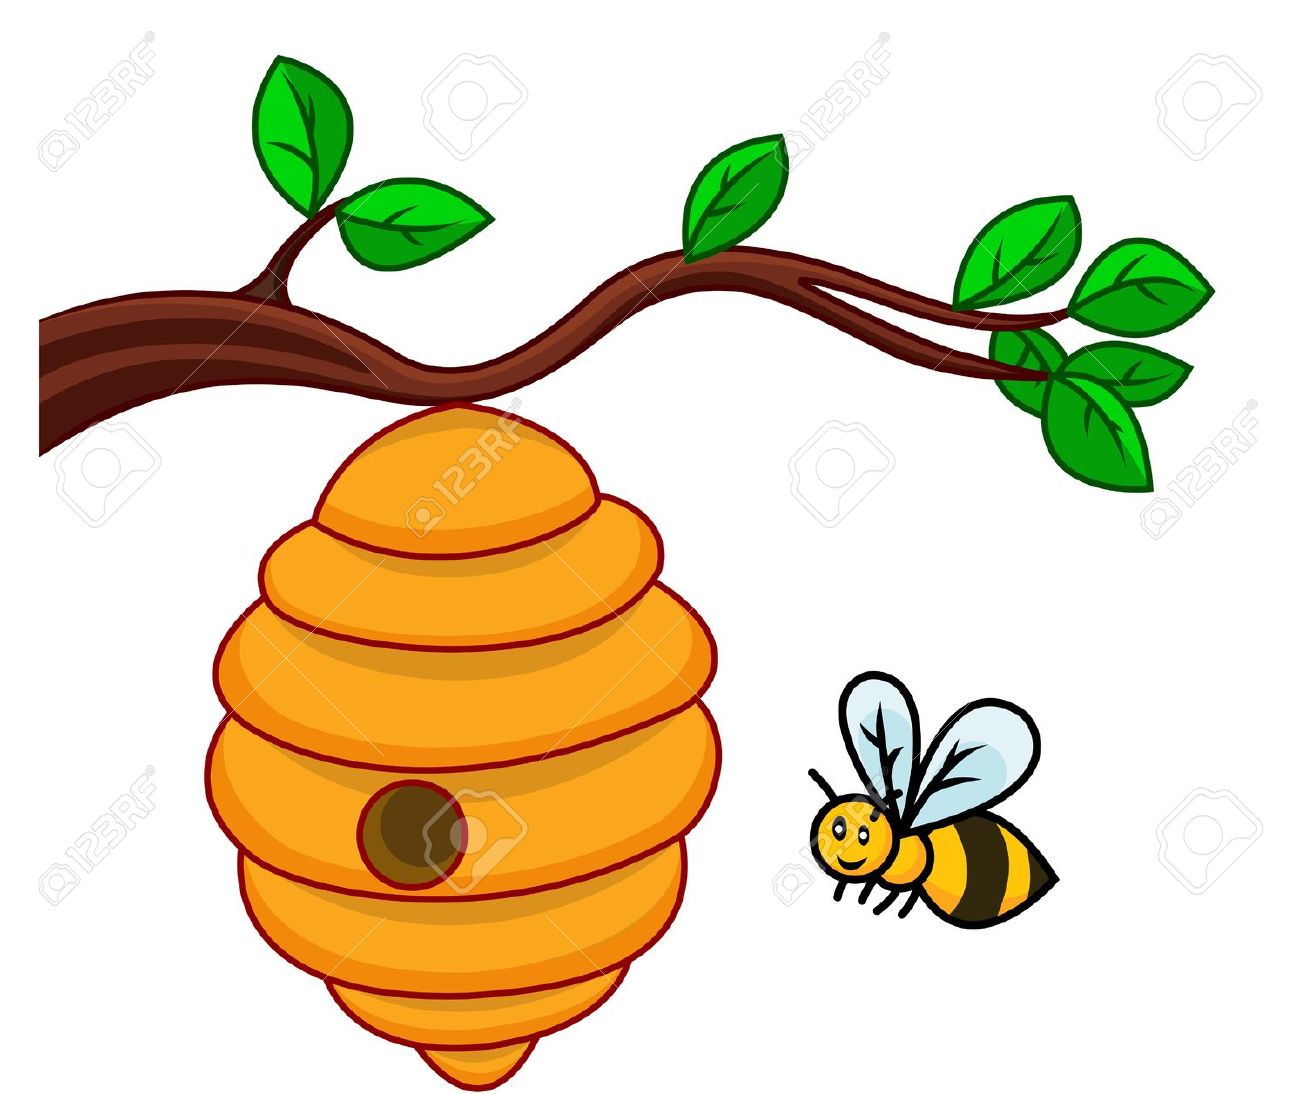 Great How To Draw Beehive of all time Check it out now 